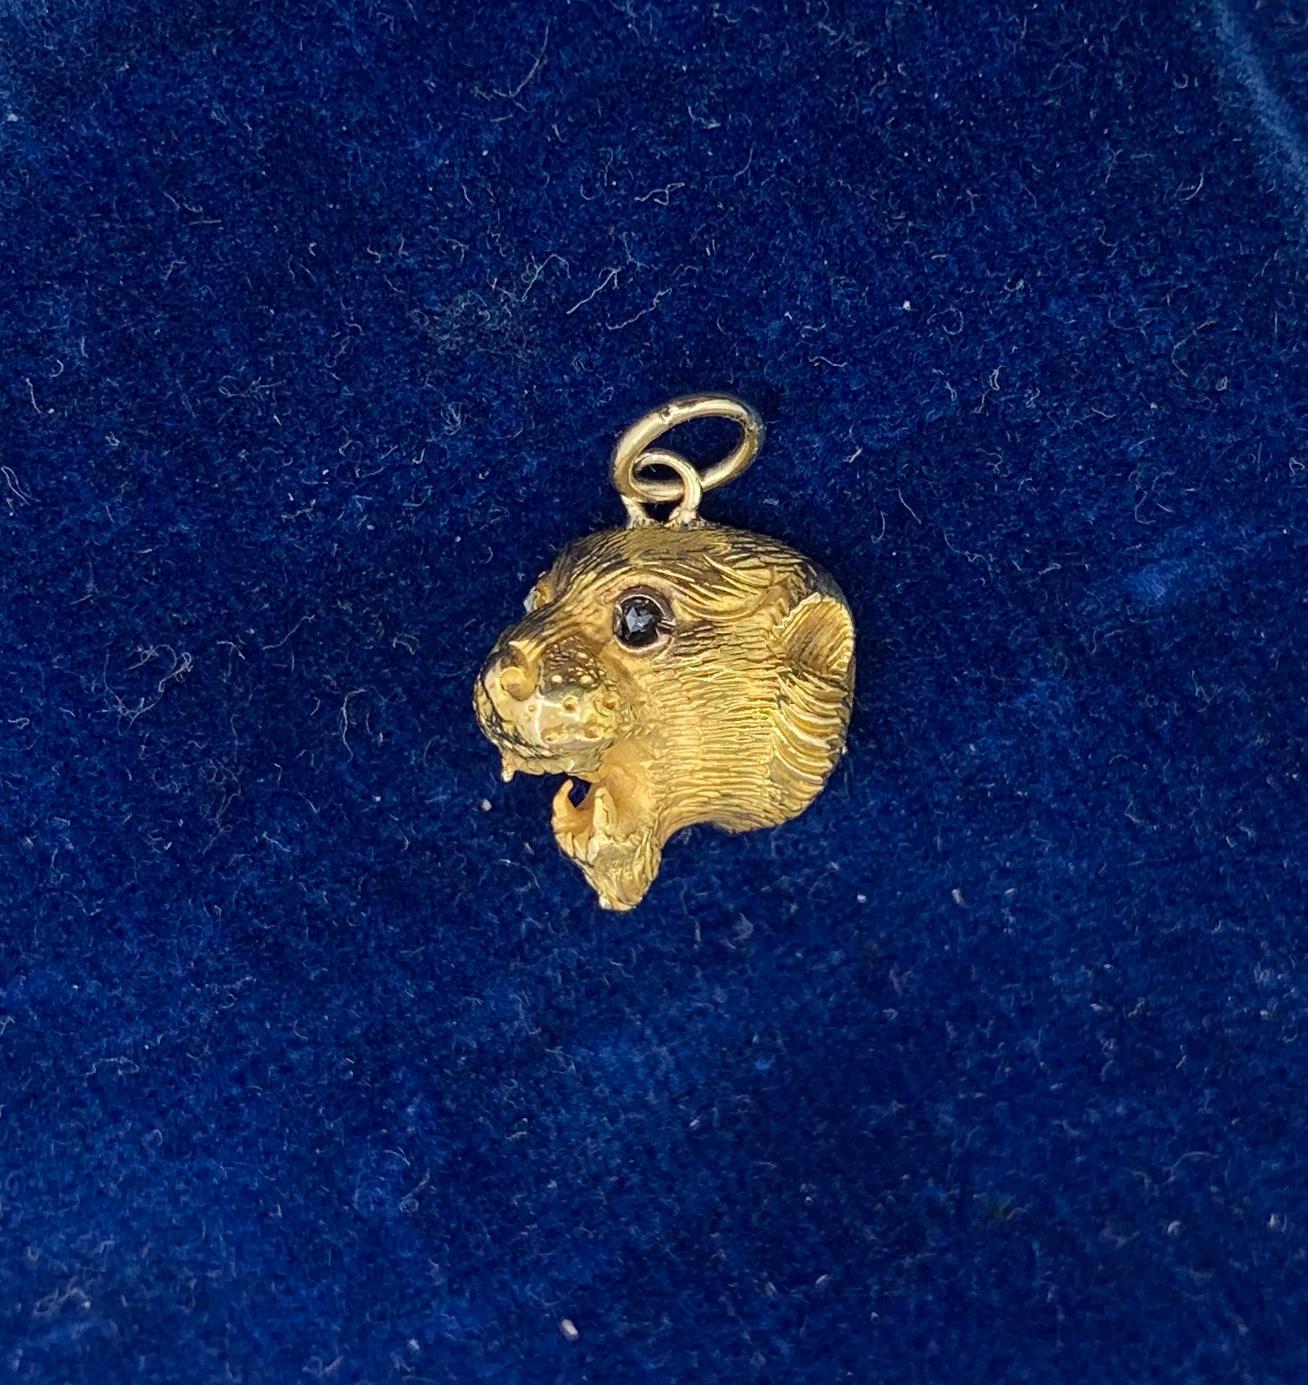 A wonderful antique Belle Epoque, Victorian pendant with a beautifully modeled lion, leopard or panther in 14 Karat Gold with one Sapphire and Diamond eye.  We love our panther, lion, cat jewelry and this one has such stunning design.   The engraved